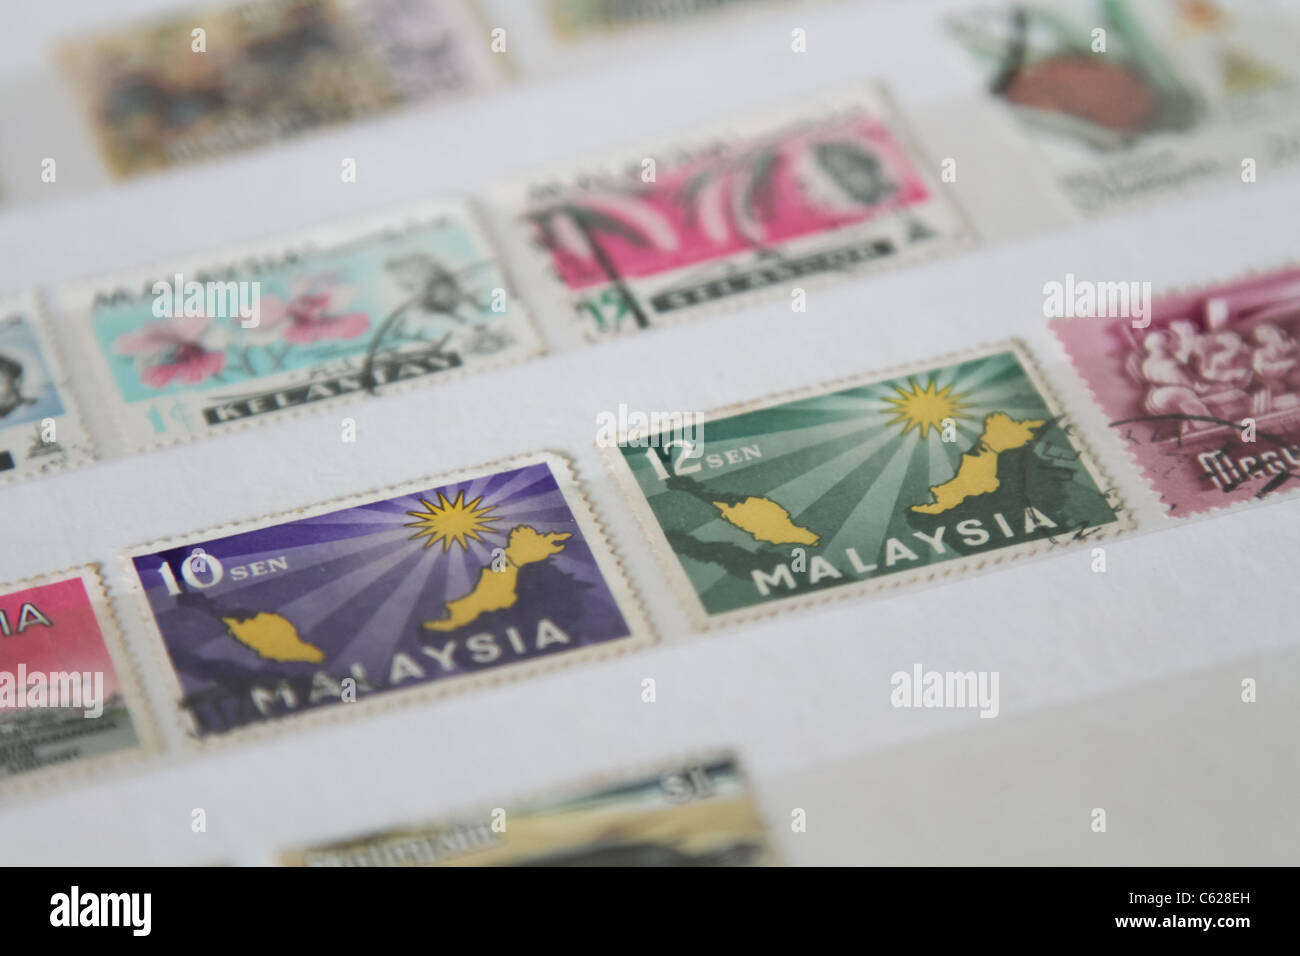 Malaysia stamp stamp collection Stock Photo